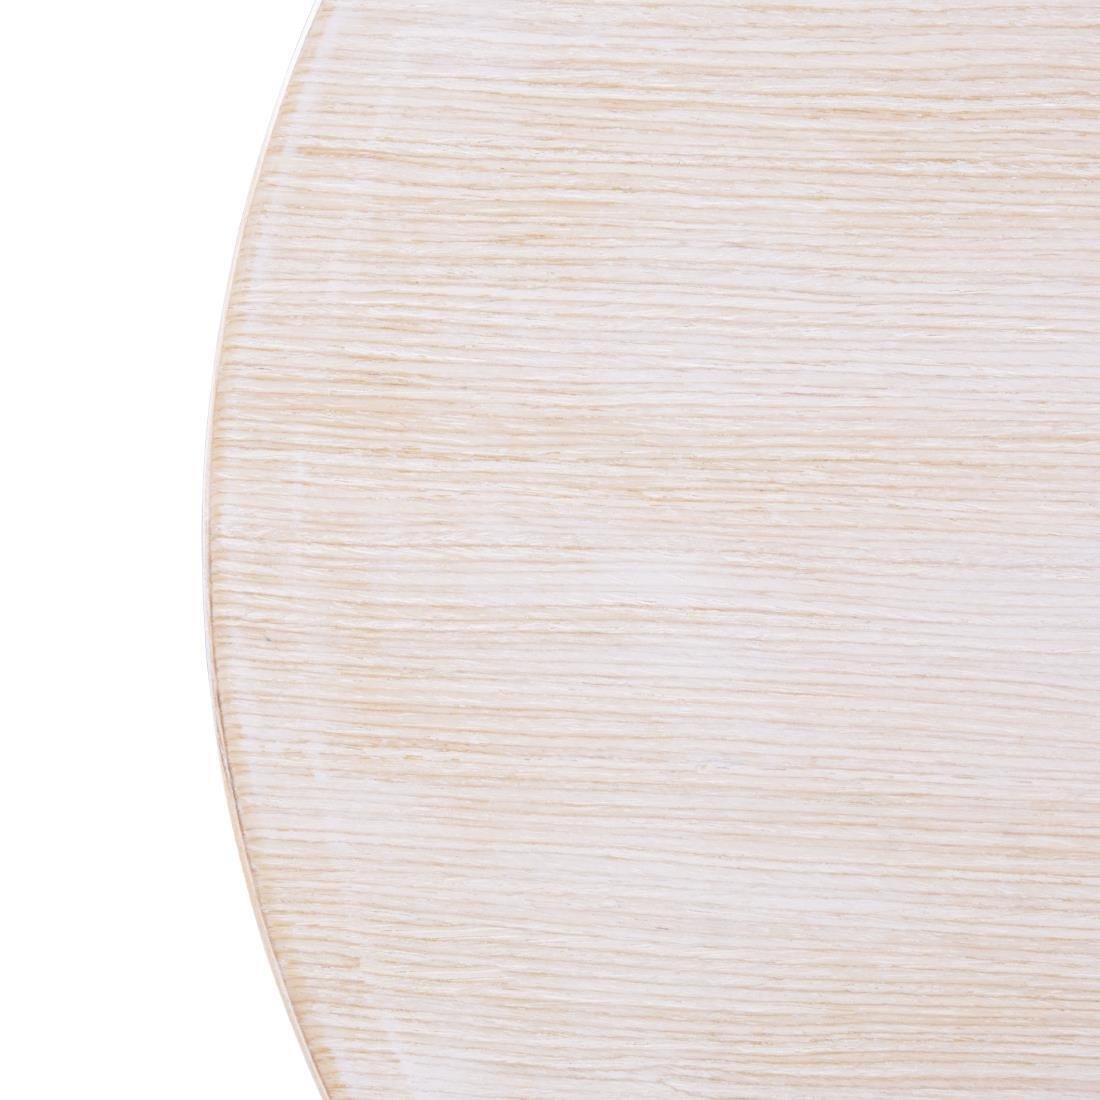 Bolero Pre-drilled Round Table Top Vintage White 600mm - DY729  - 3